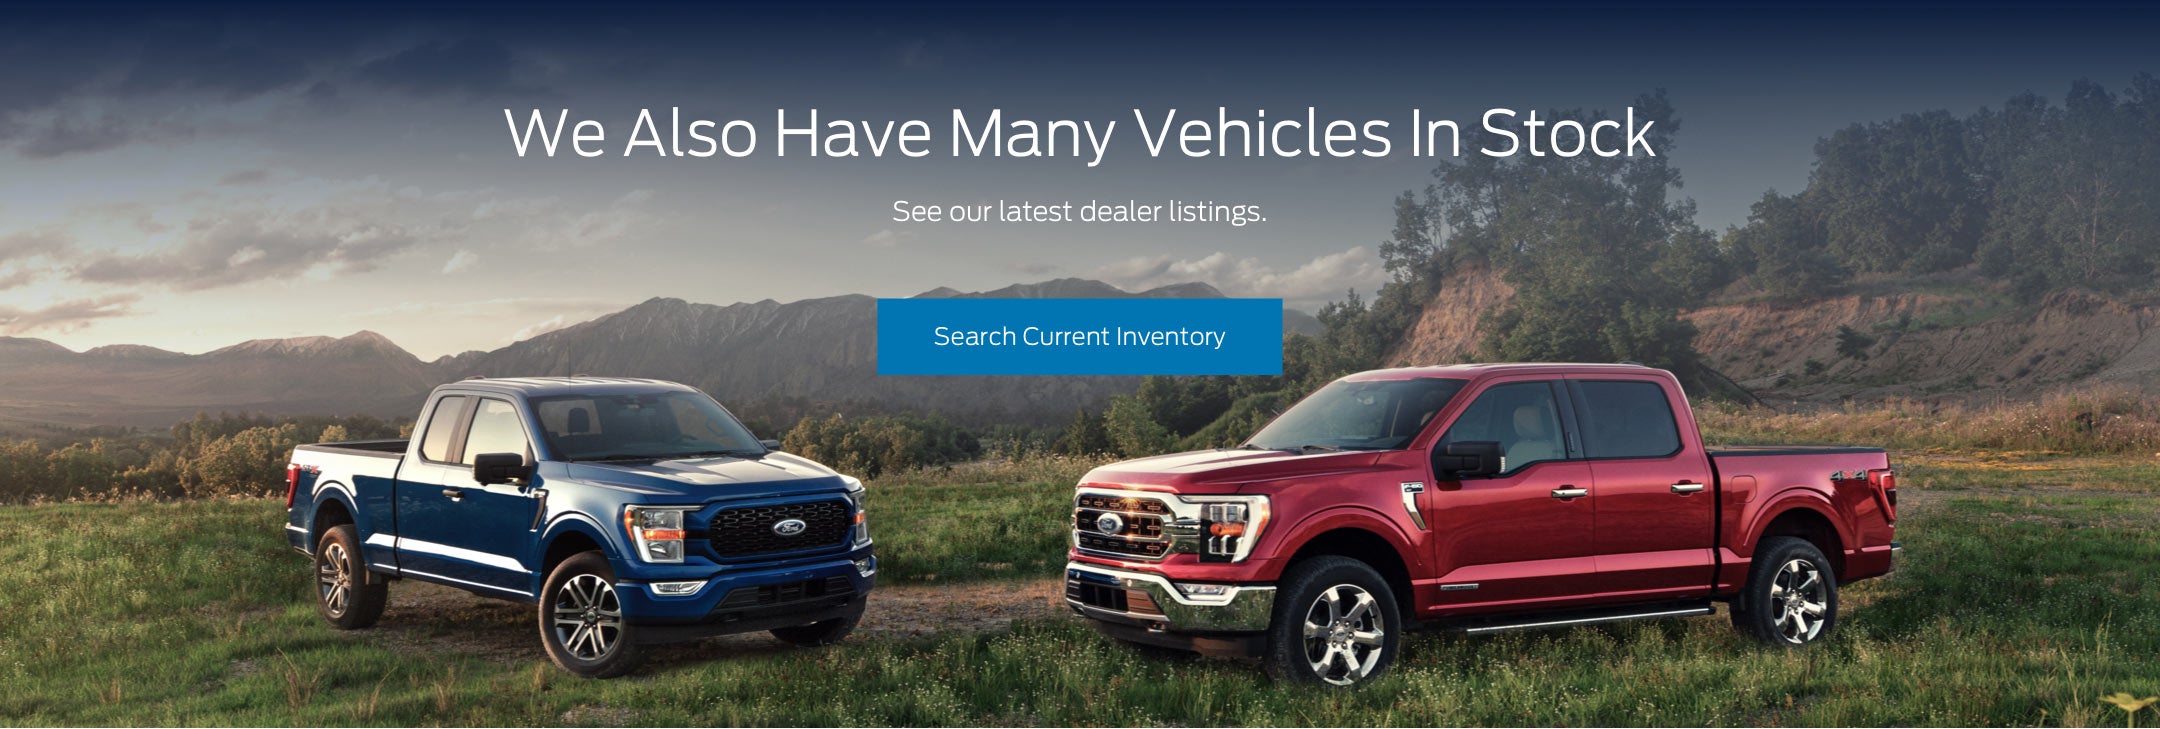 Ford vehicles in stock | Champion Ford in Owensboro KY